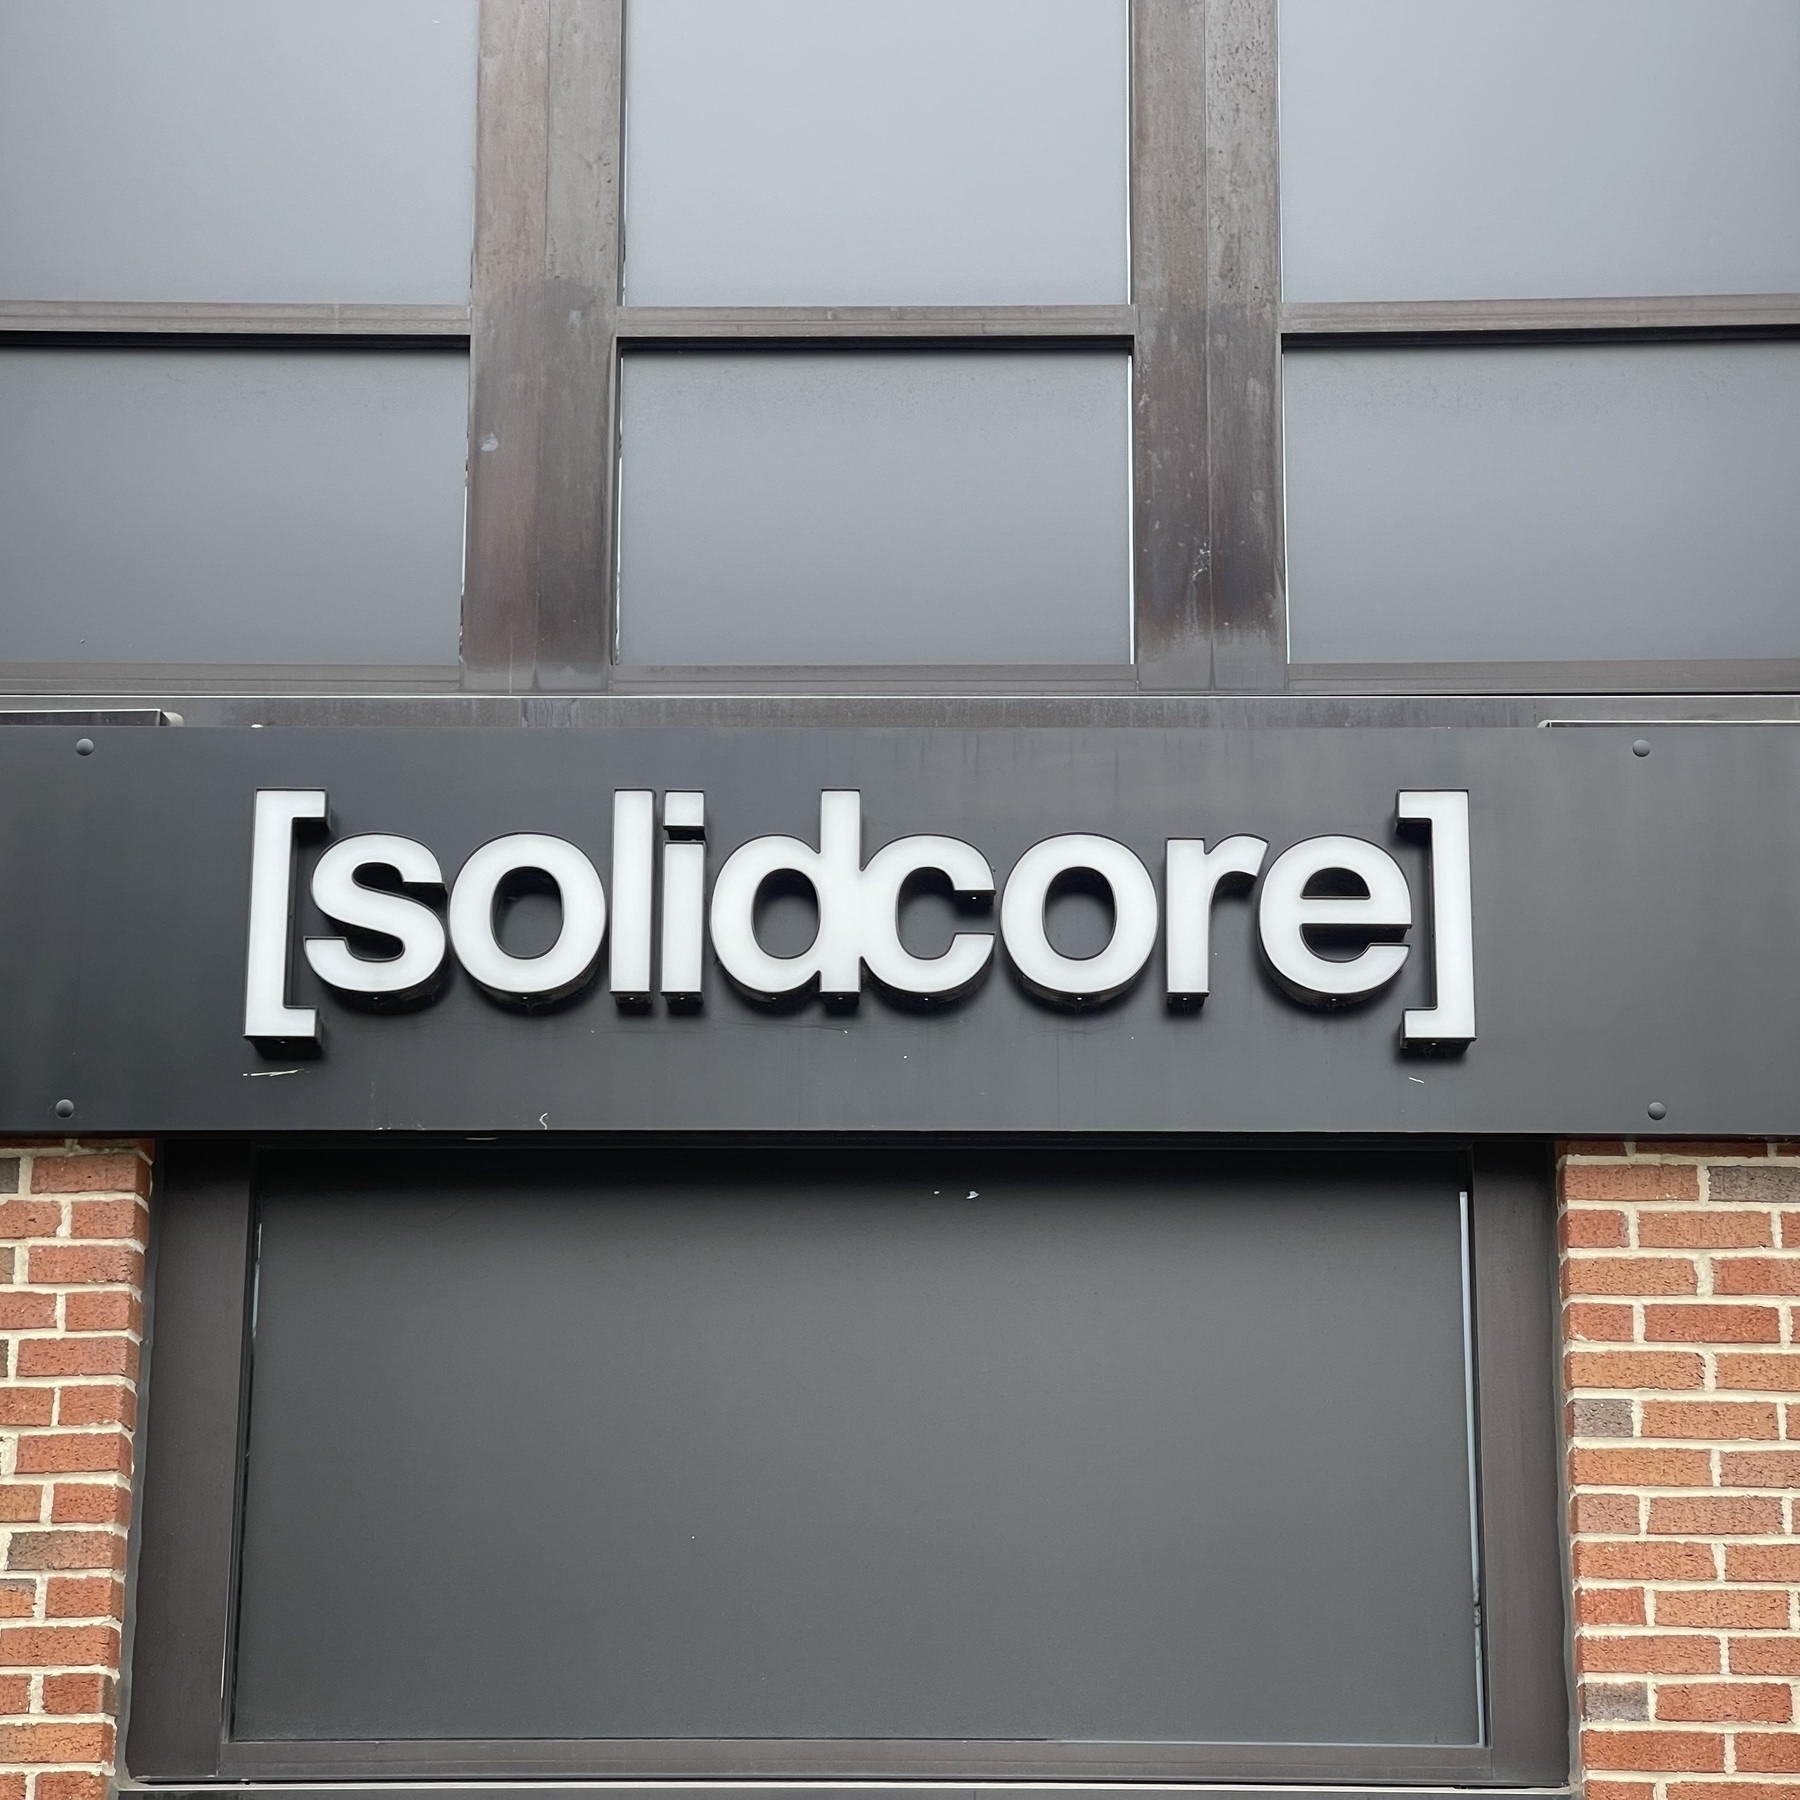 Sign saying “solidcore”